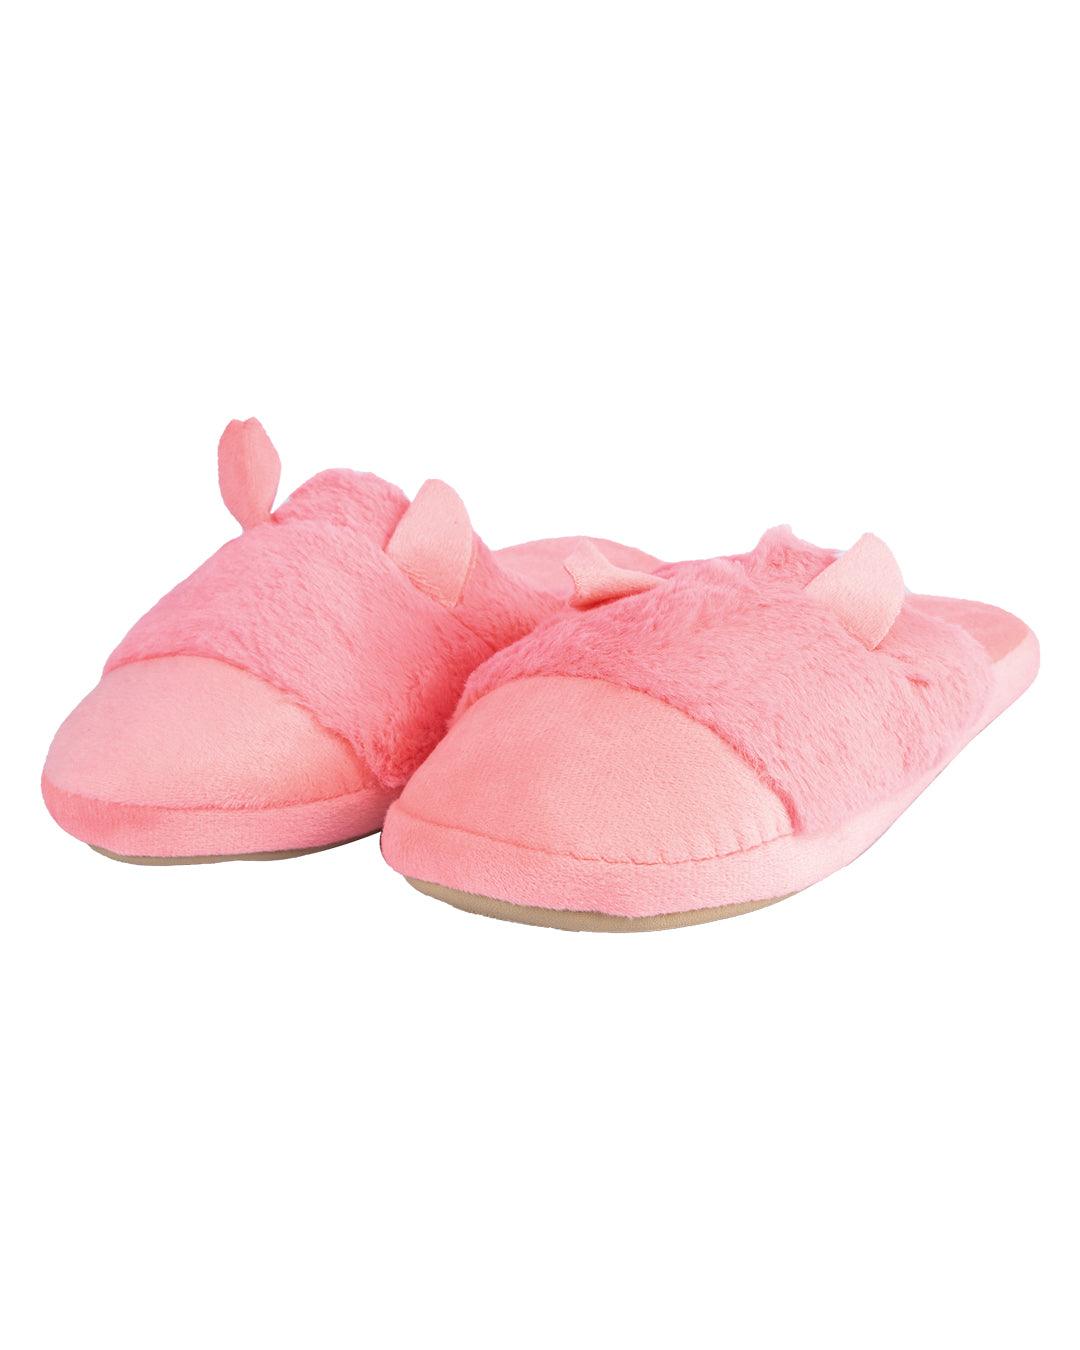 Donati Bedroom Fluffy Slippers, Pink, Polyester - MARKET 99